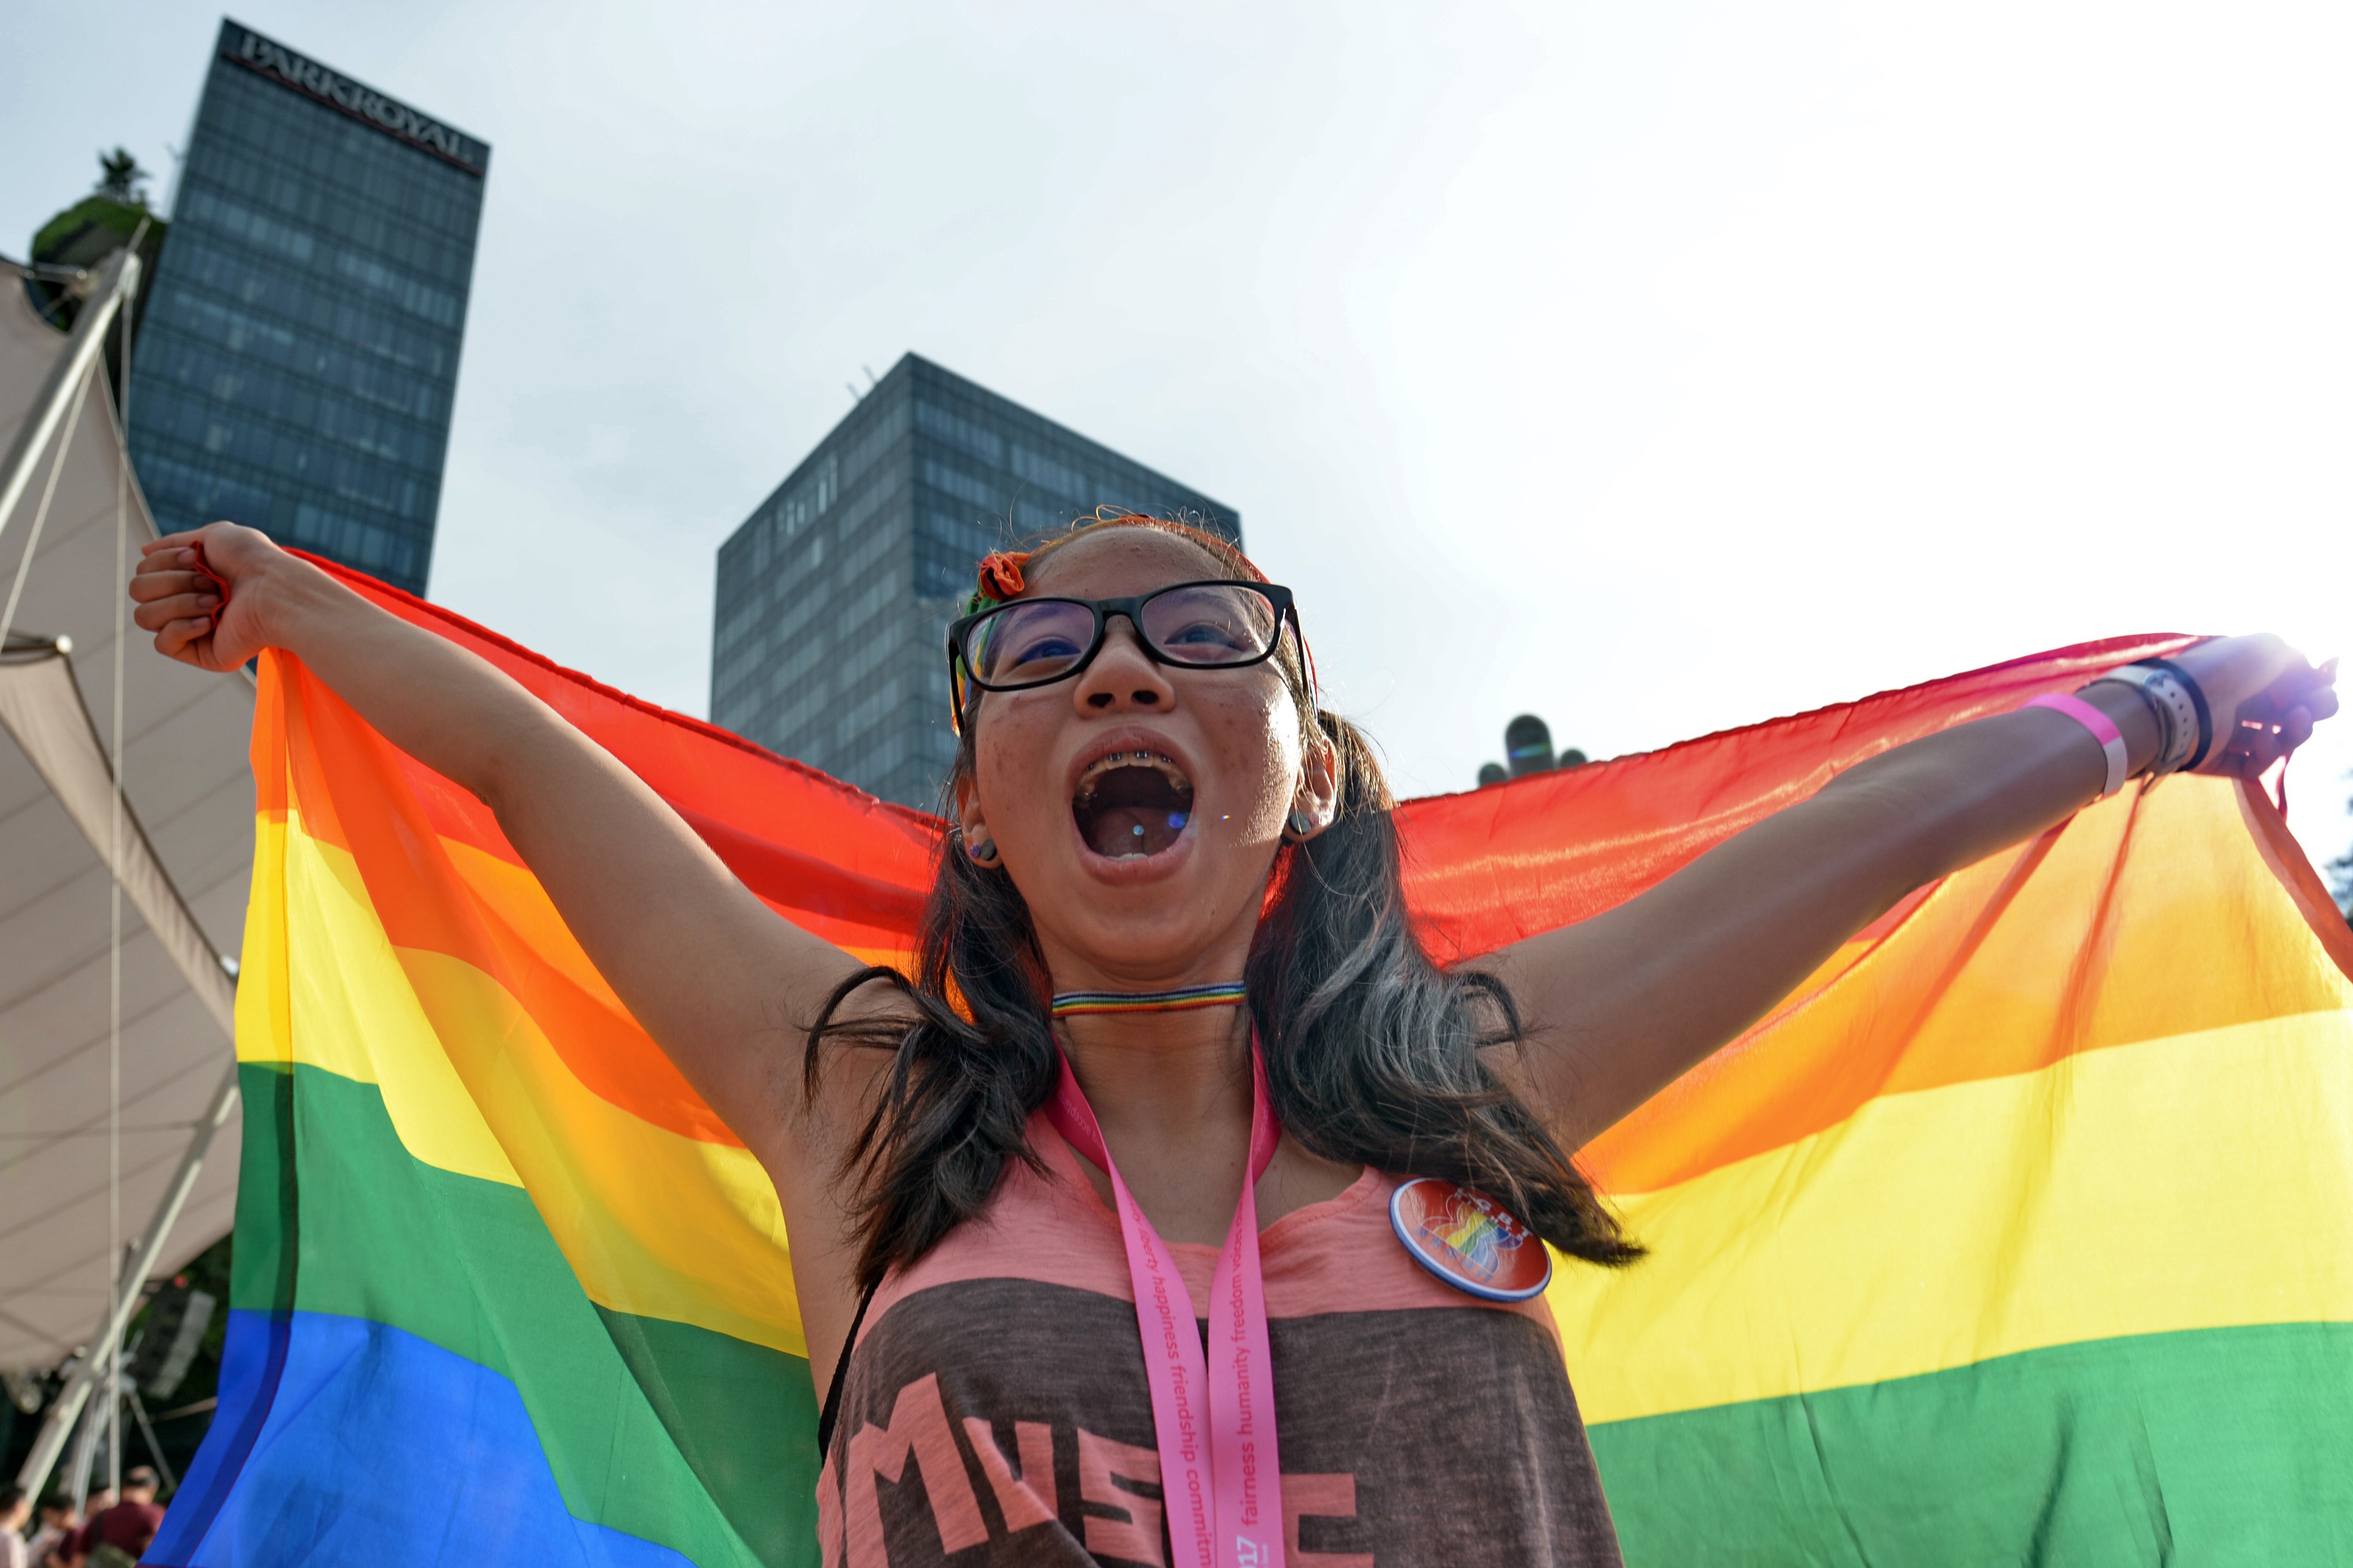 The Lion City’s discussion of a law criminalising homosexual acts has unleashed a barely disguised politics of disgust that is inflicting real damage on the mental health of LGBTI individuals